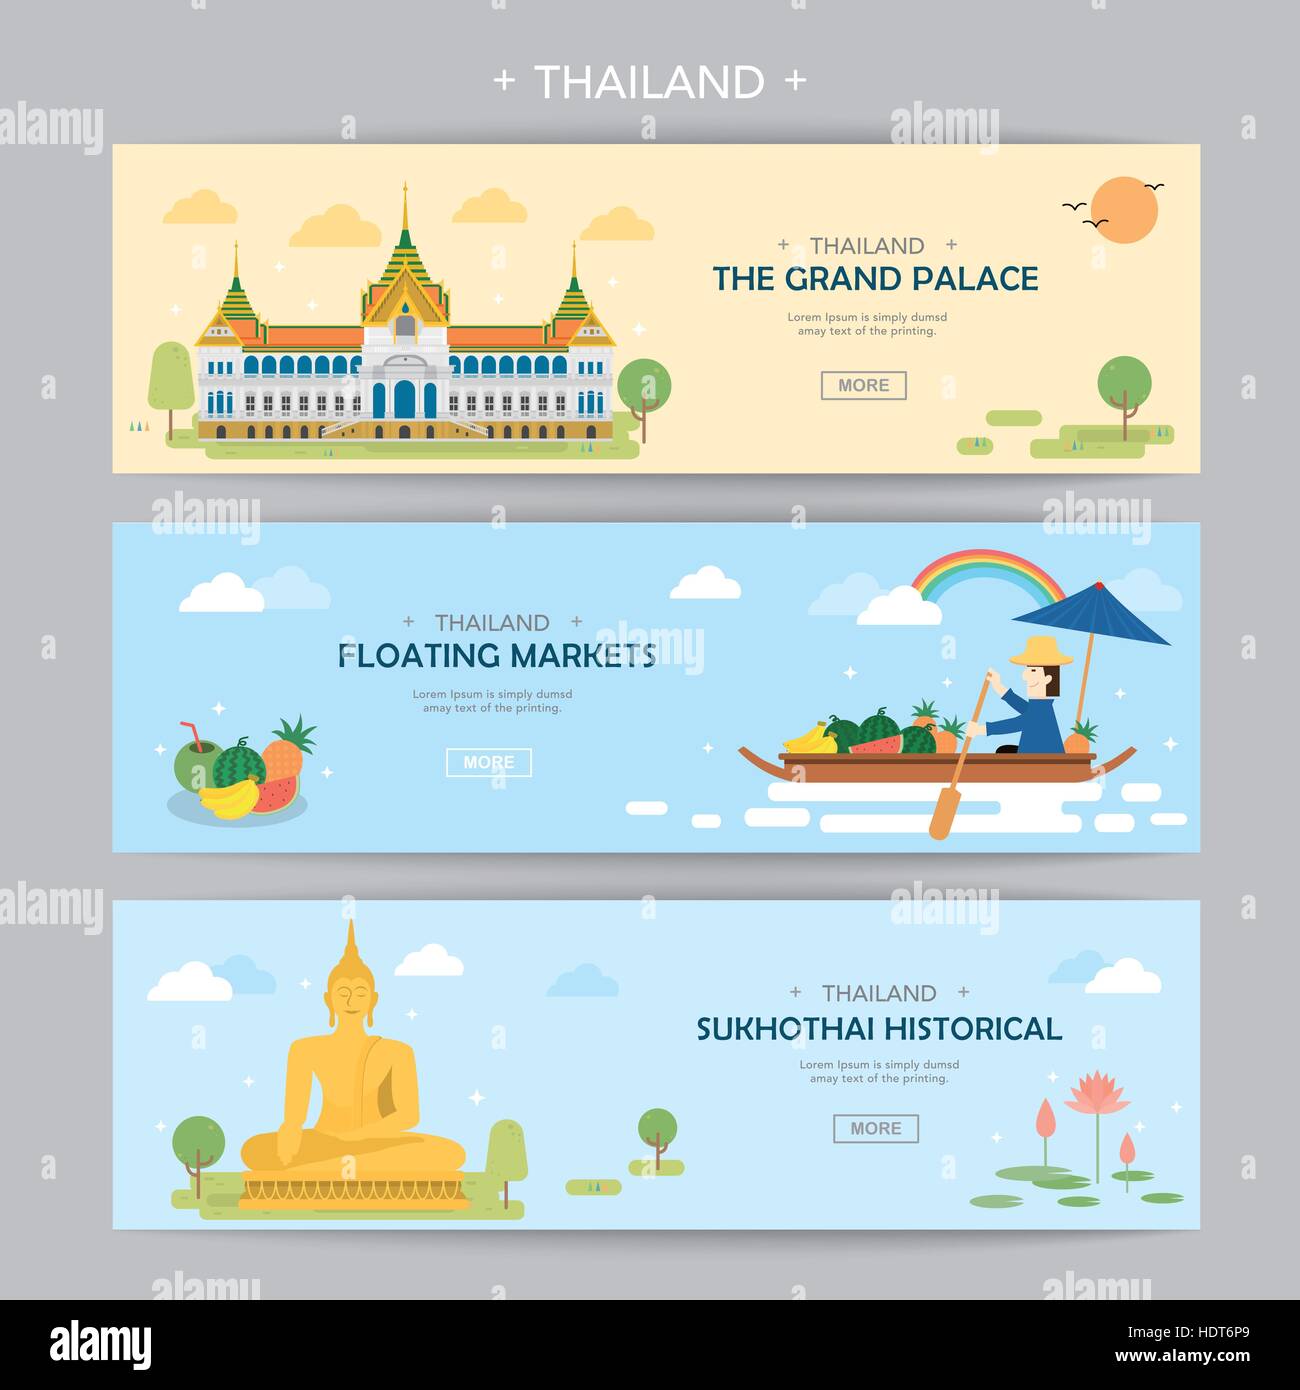 Thailand travel concept banners set in flat style Stock Vector